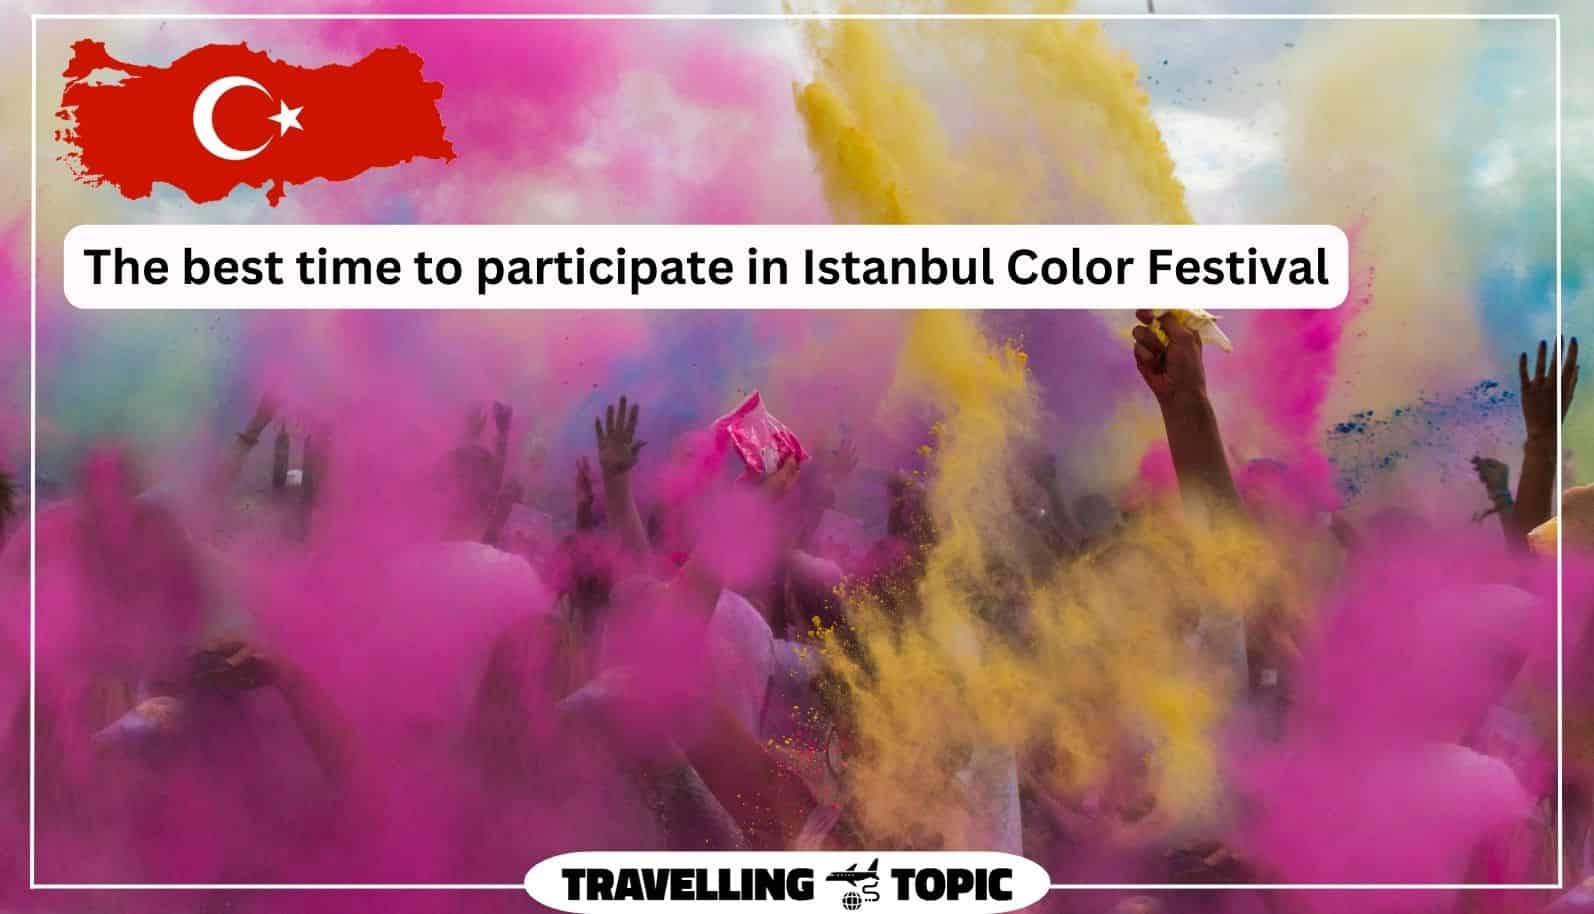 The best time to participate in Istanbul Color Festival